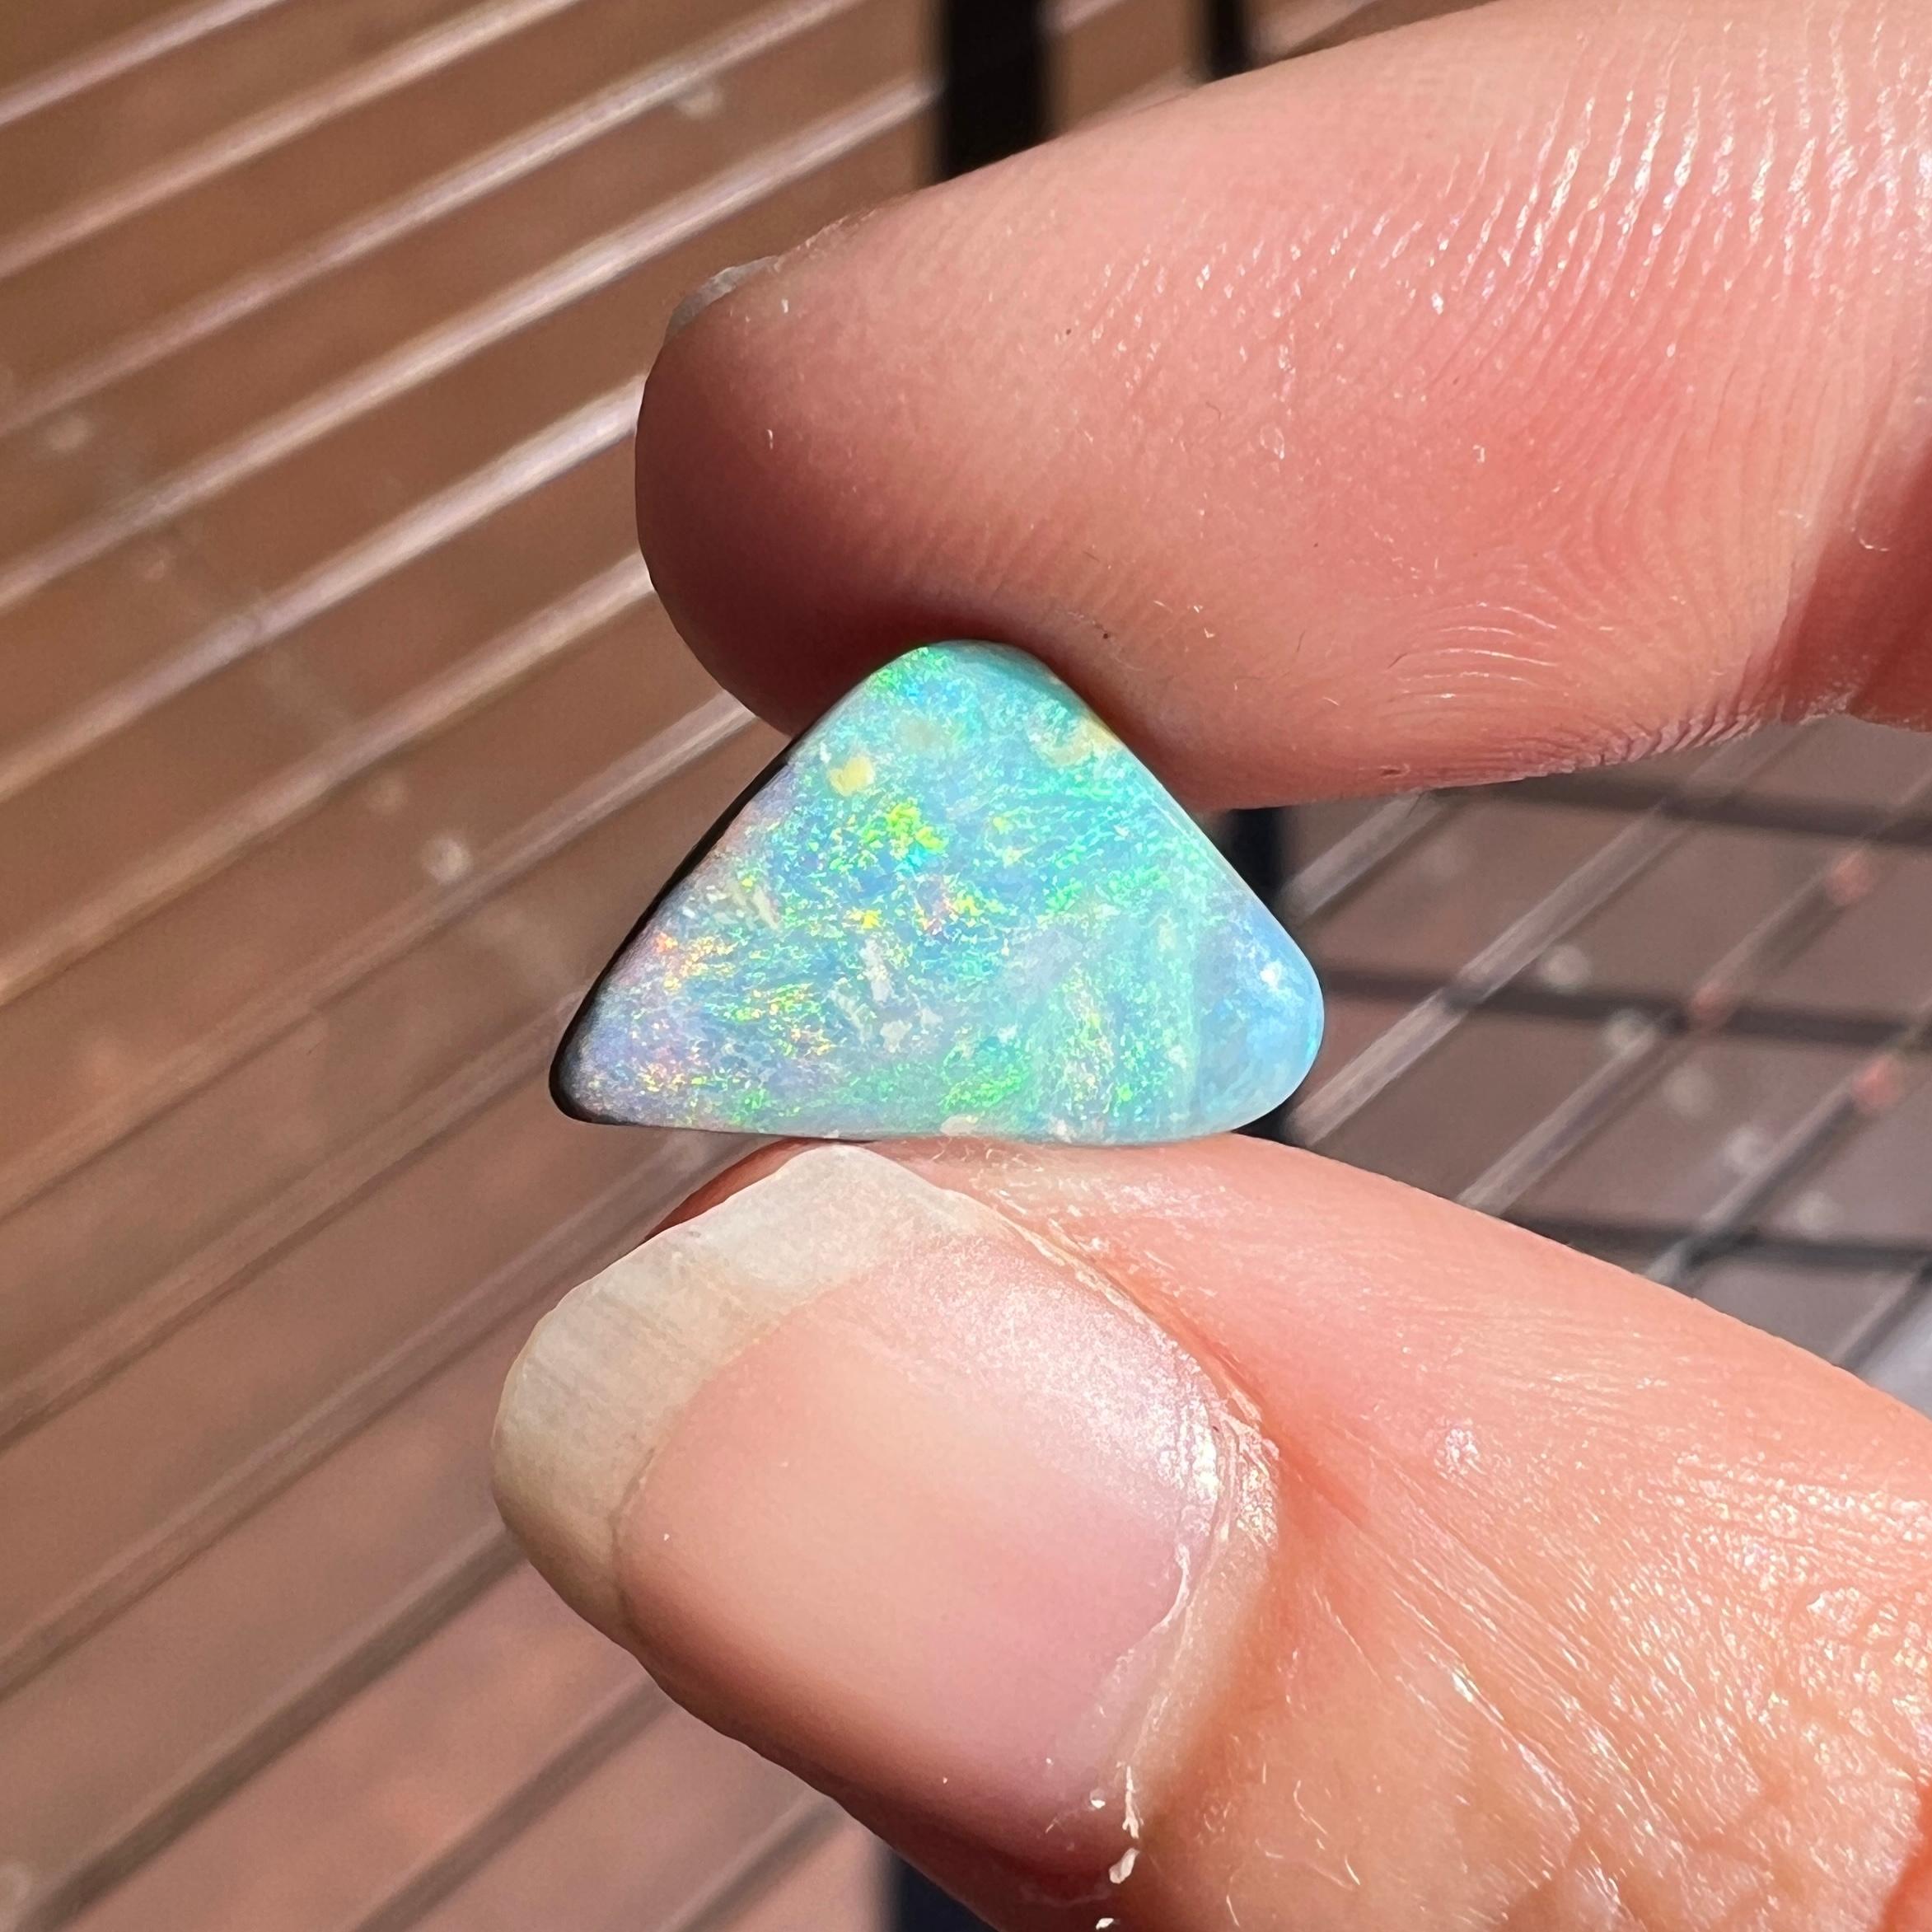 This lovely 4.15 Ct Australian boulder opal was mined by Sue Cooper at her Russells opal mine in western Queensland, Australia in 2022. Sue processed the rough opal herself and cut into into a free-form shape. We love how the pink, green and blue